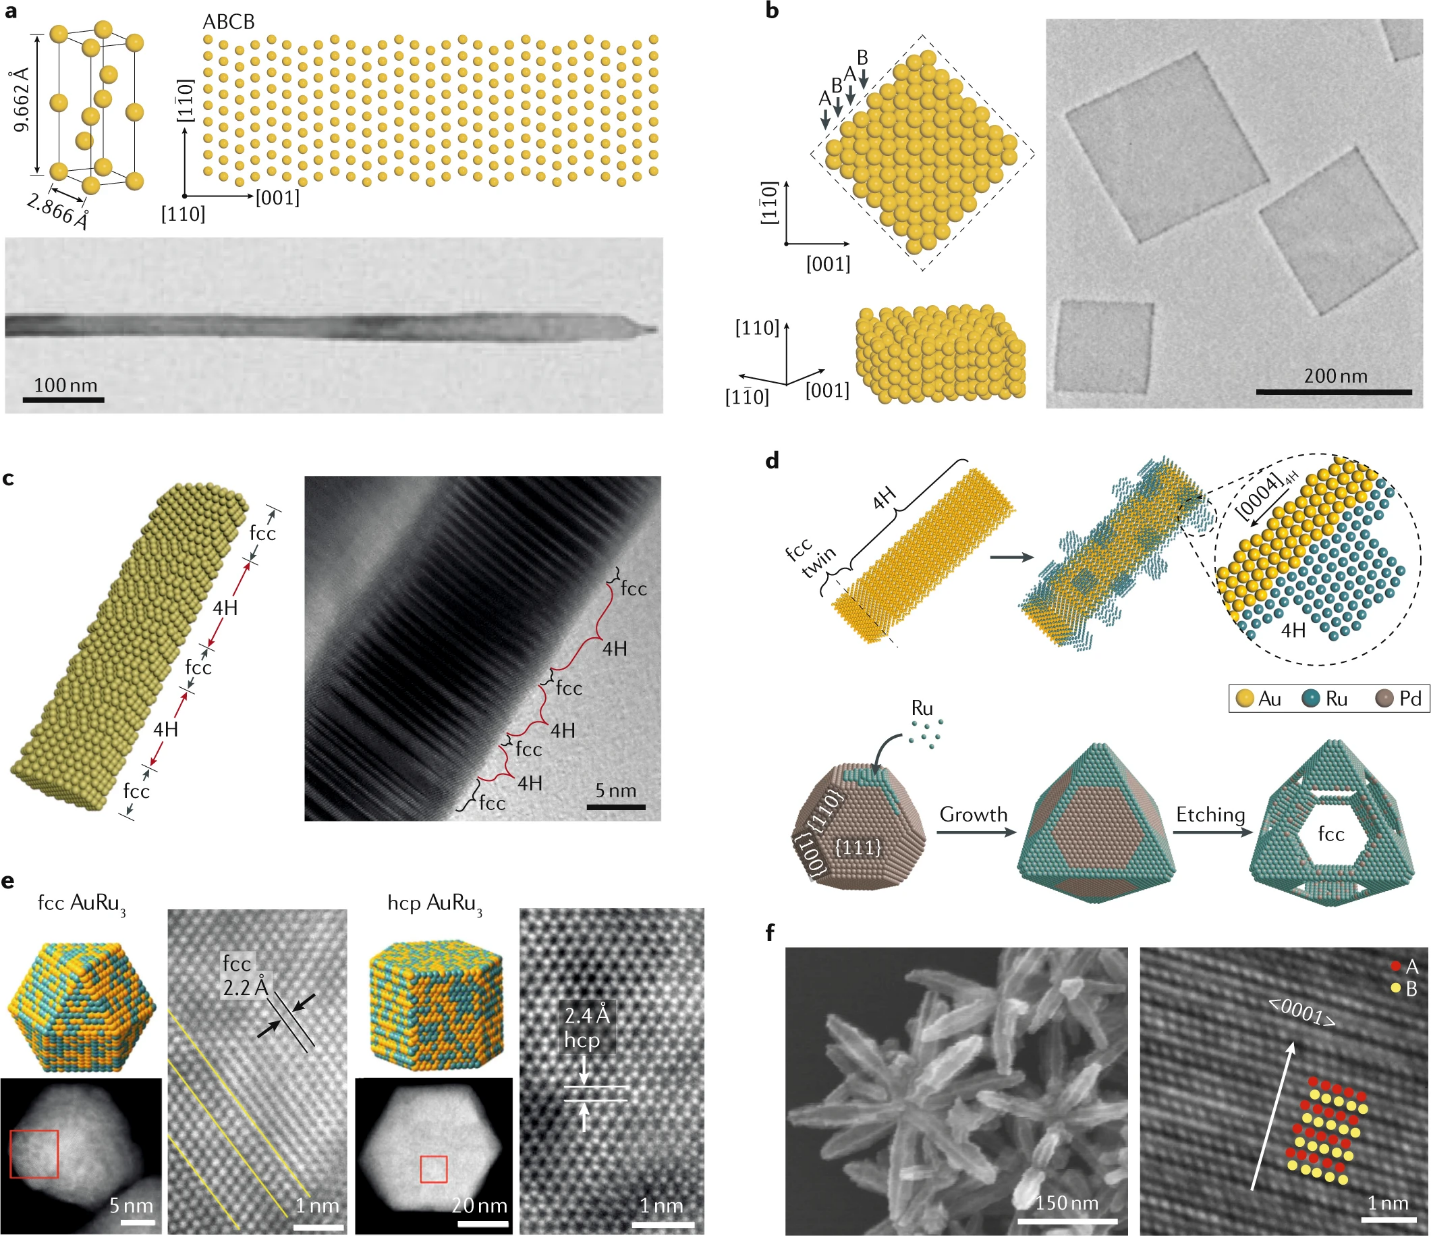 Metal nanomaterials with unconventional crystal phases